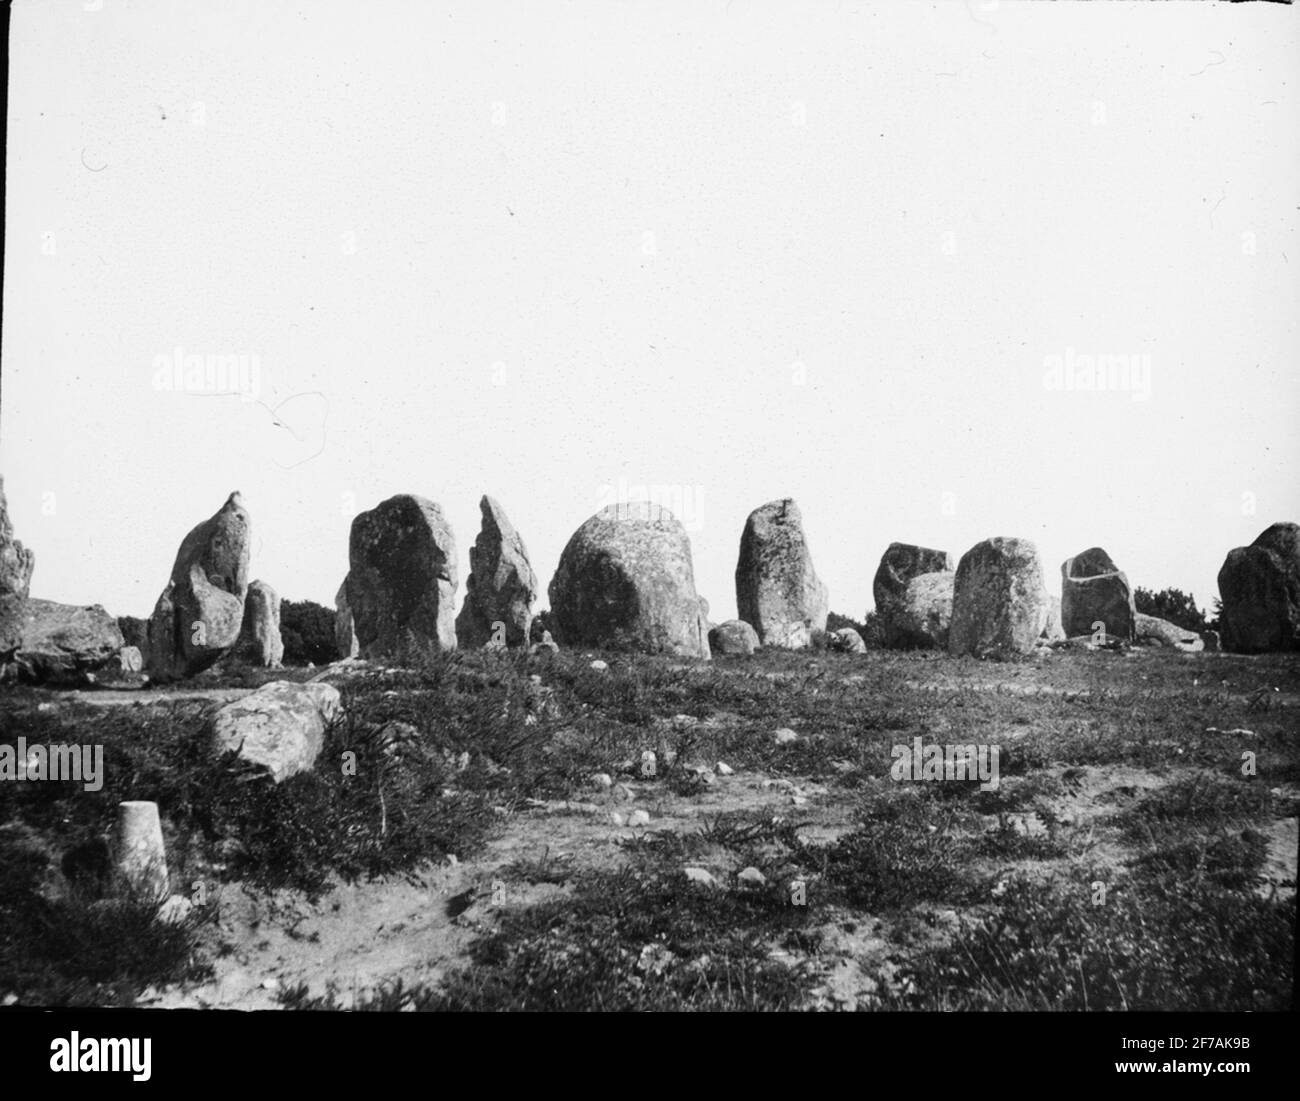 Skioptic image with motifs of menhirs in the carnac. The image has been stored in cardboard labeled: the journey in 1908. XIX. Stock Photo